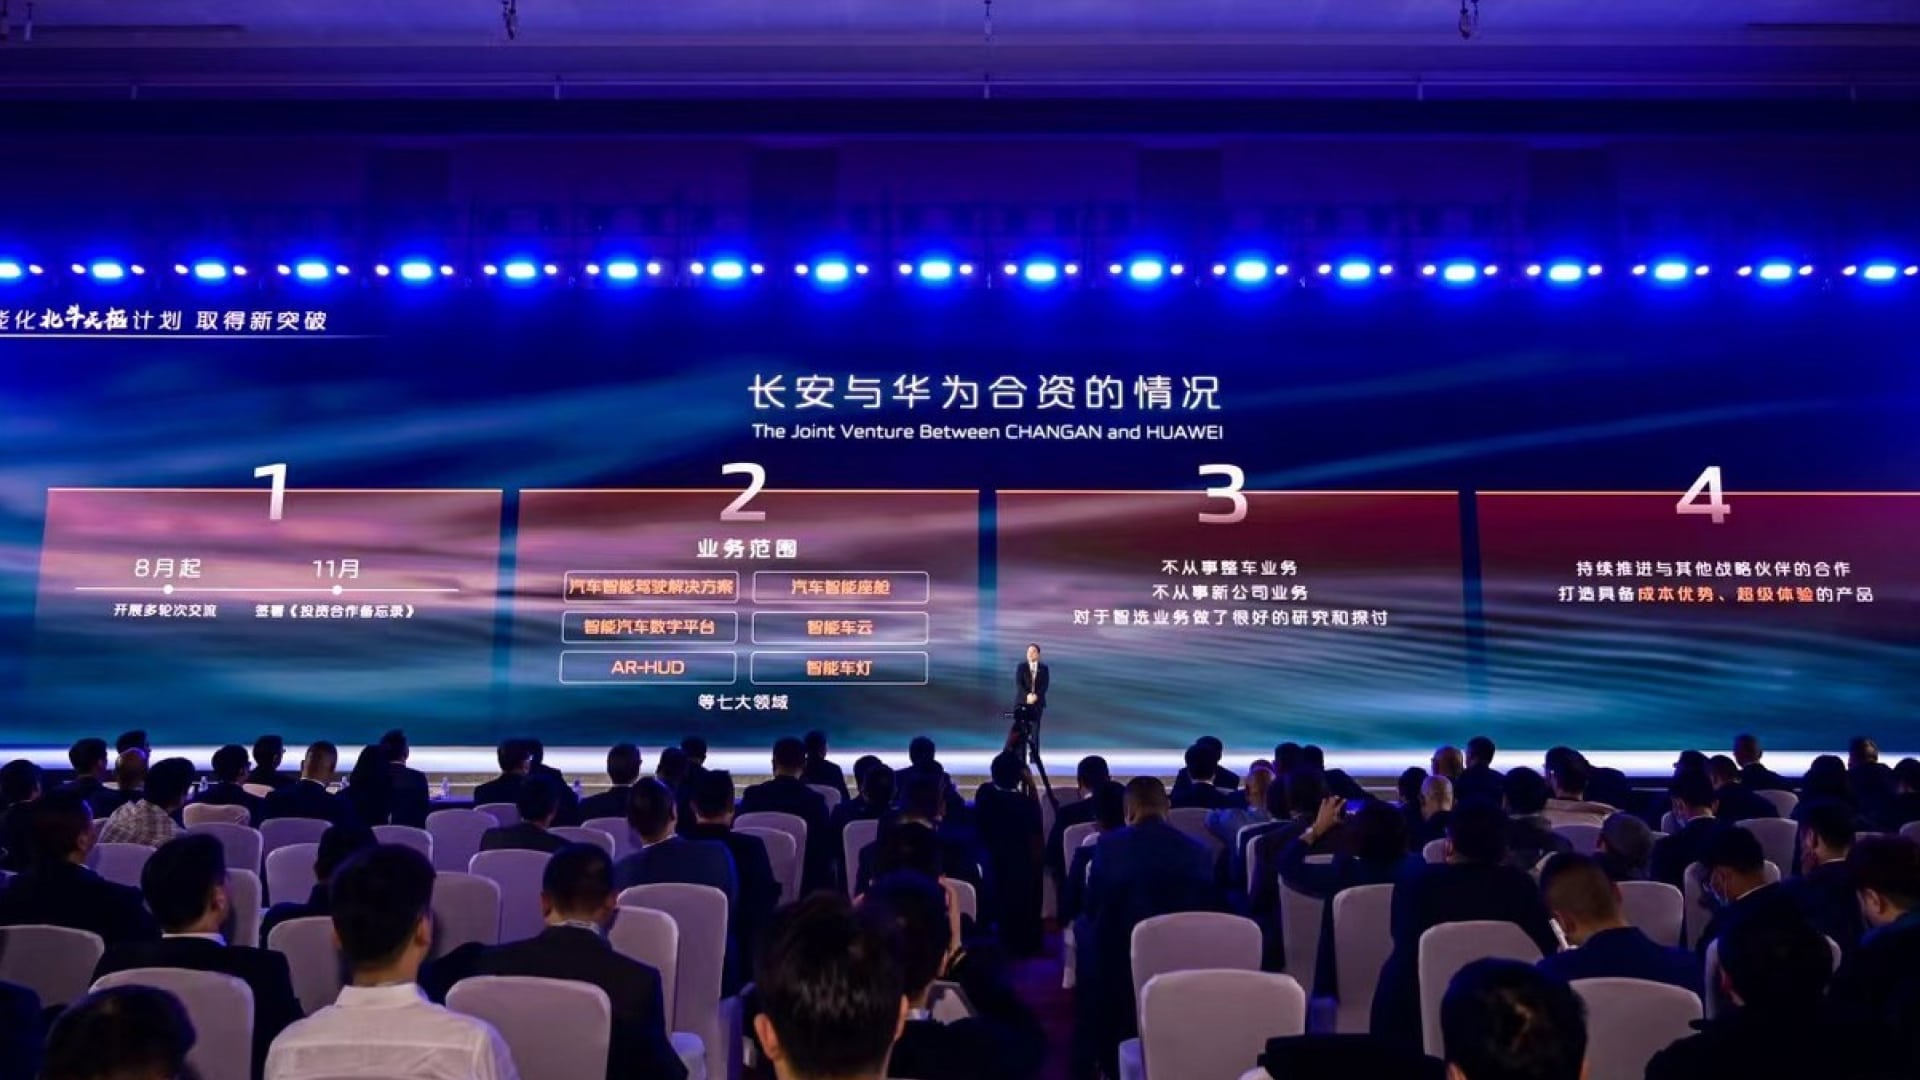 Changan and Huawei unveil “Newcool” joint venture at global partner conference